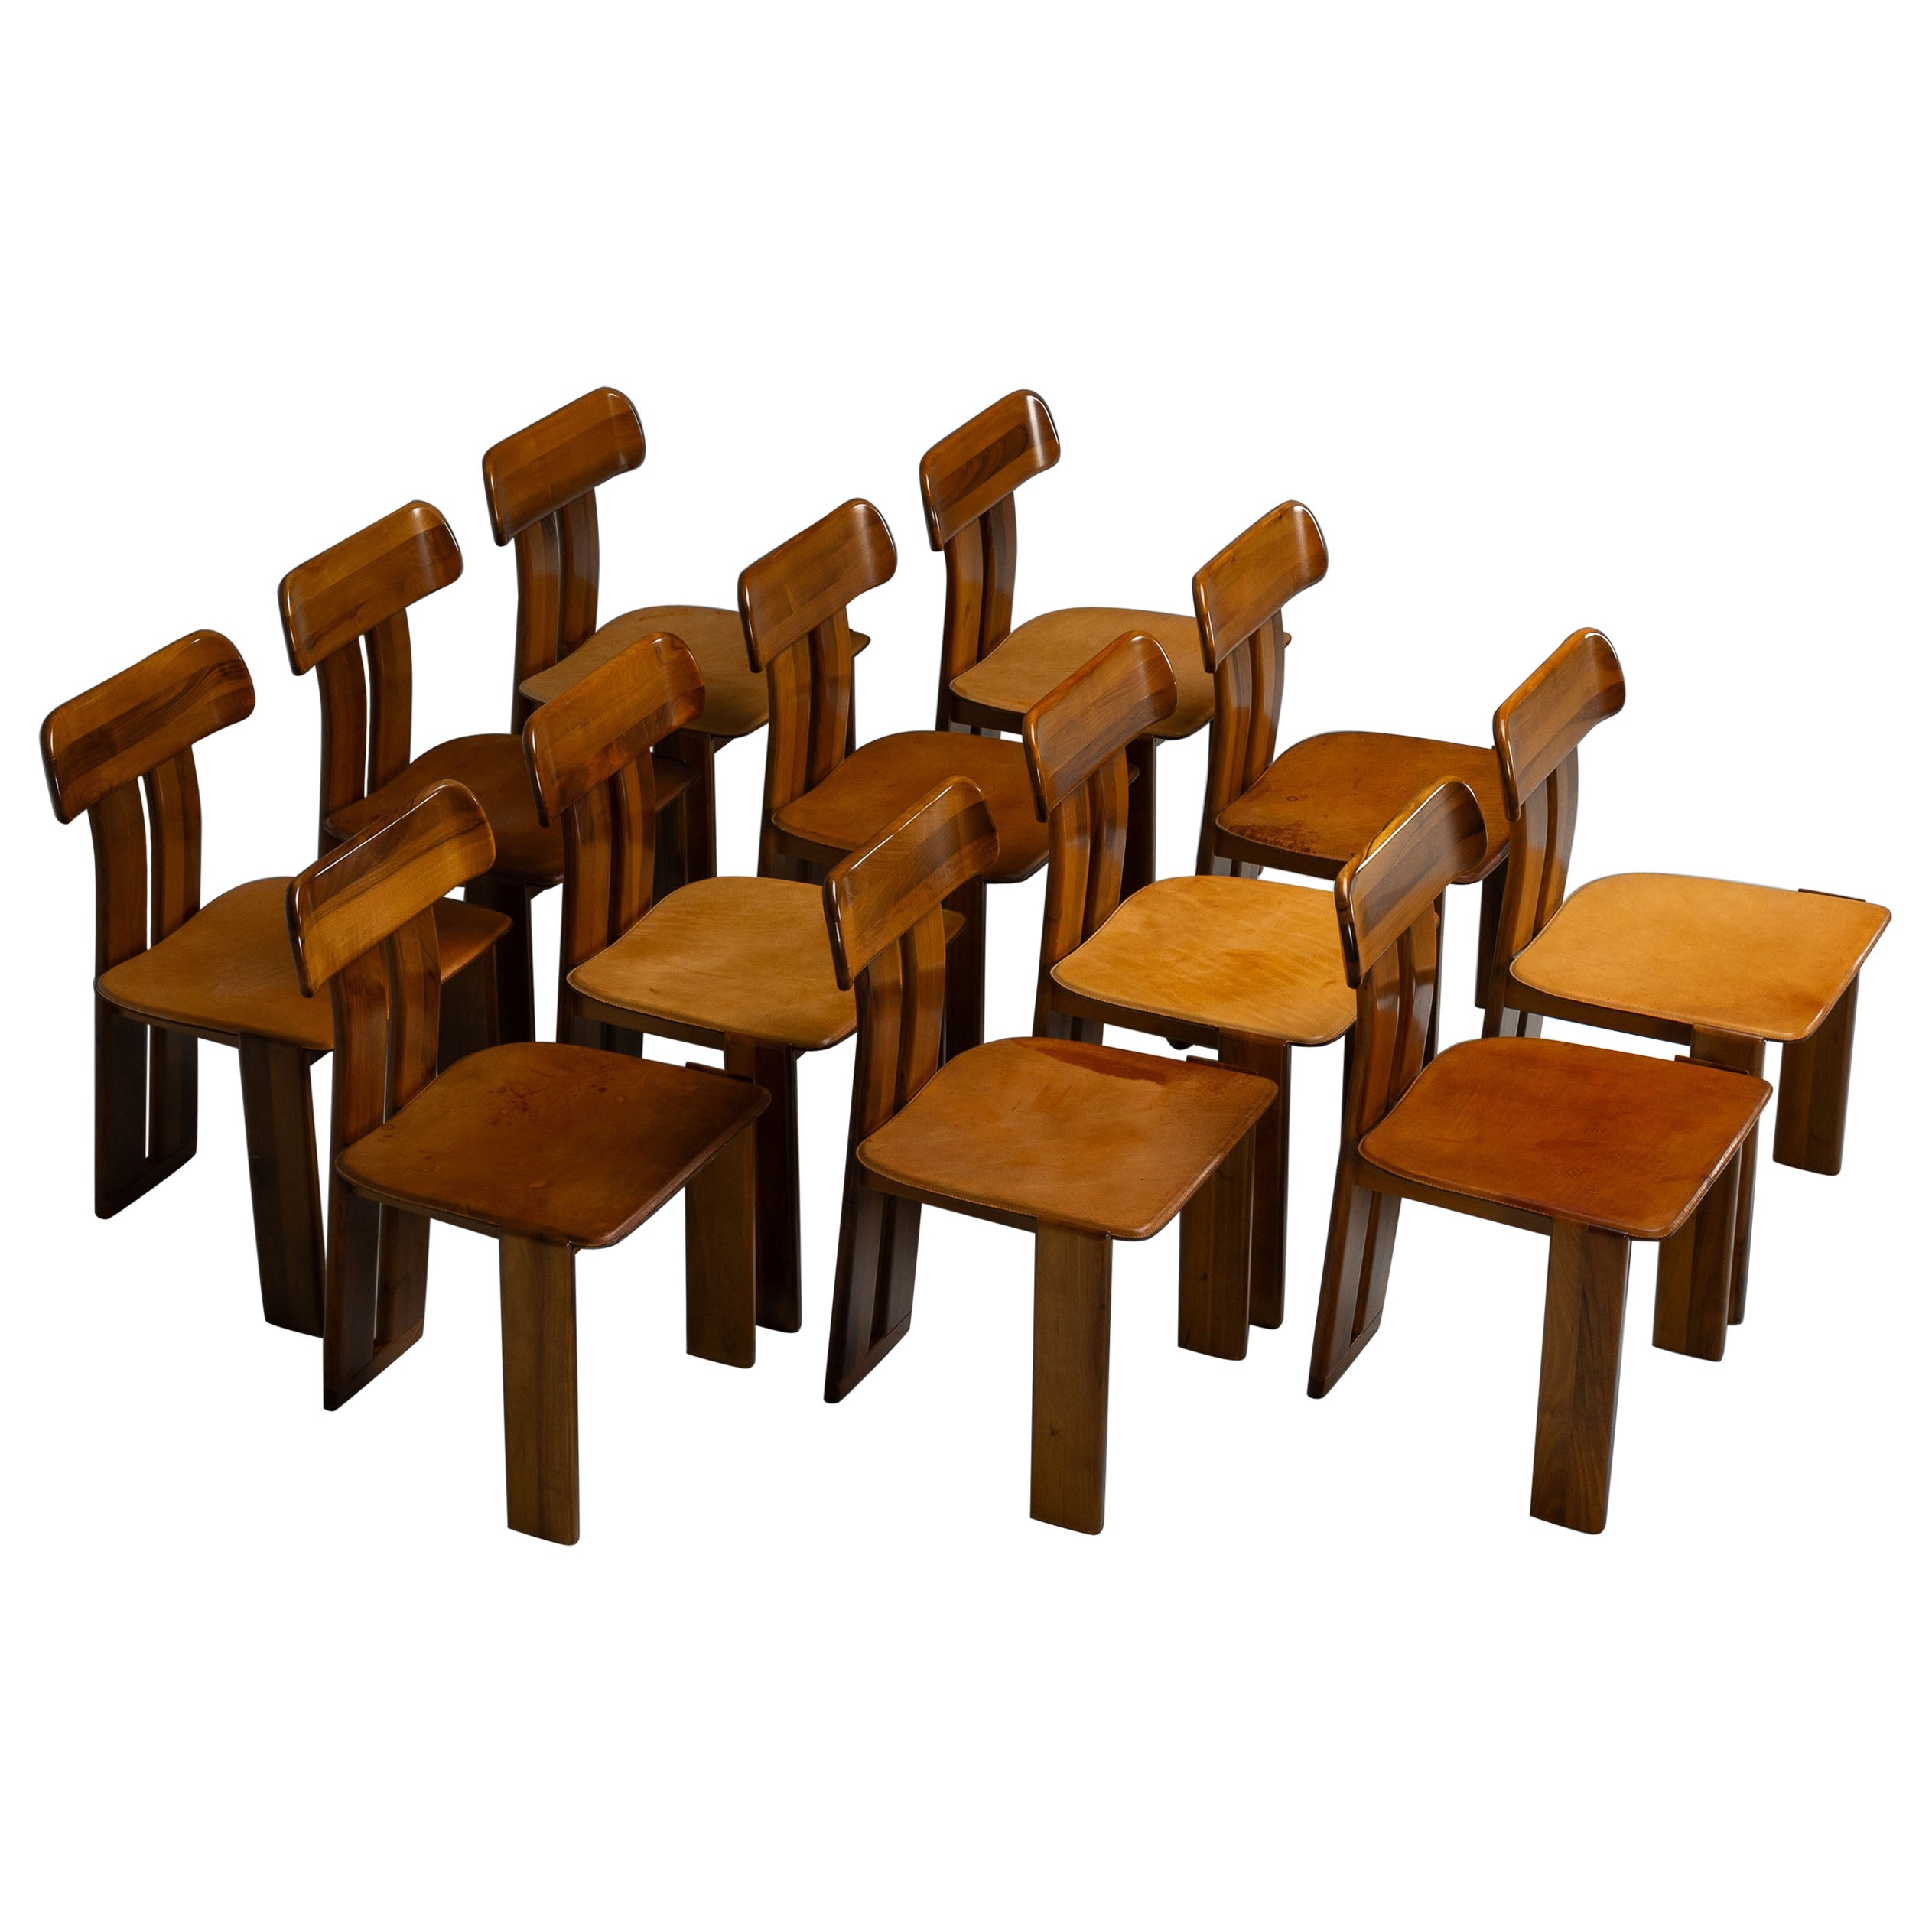 Mario Marenco Sapporo chairs for Mobil Girgi Italy 1970 For Sale